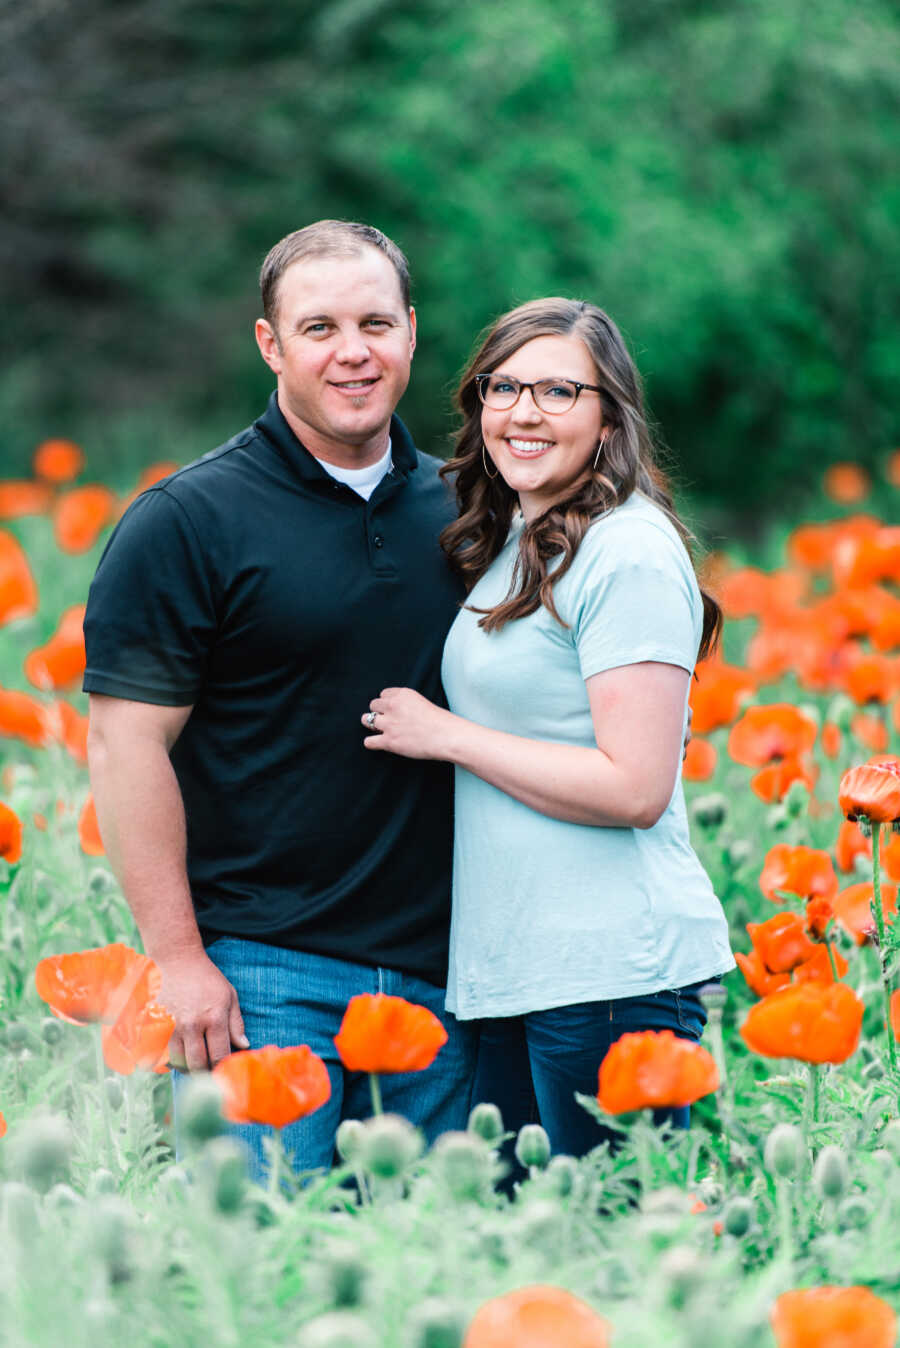 couple poses smiling while in a field of flowers